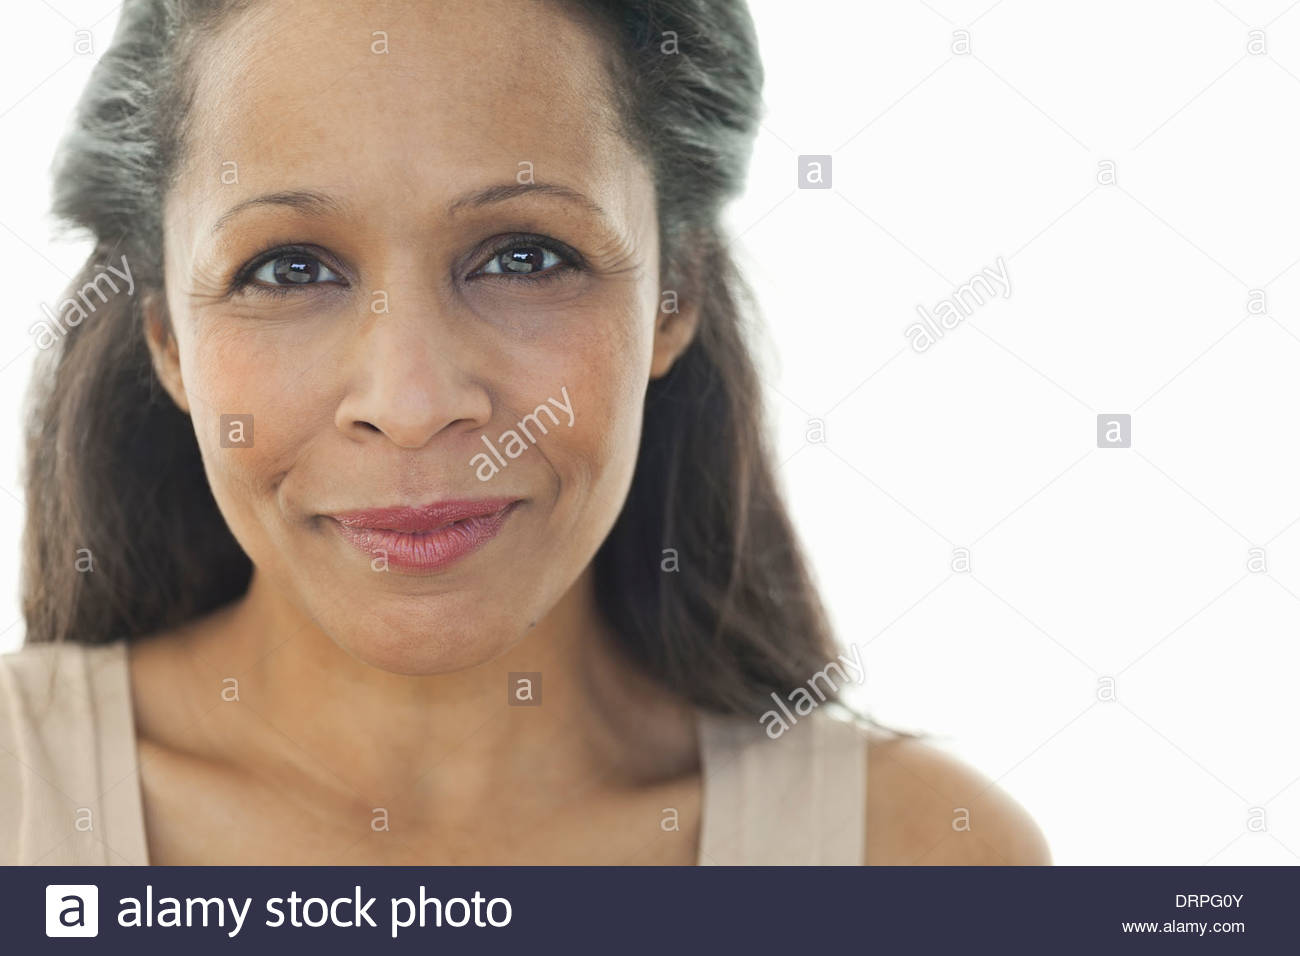 Close-up portrait of beautiful woman against white background Stock Photo